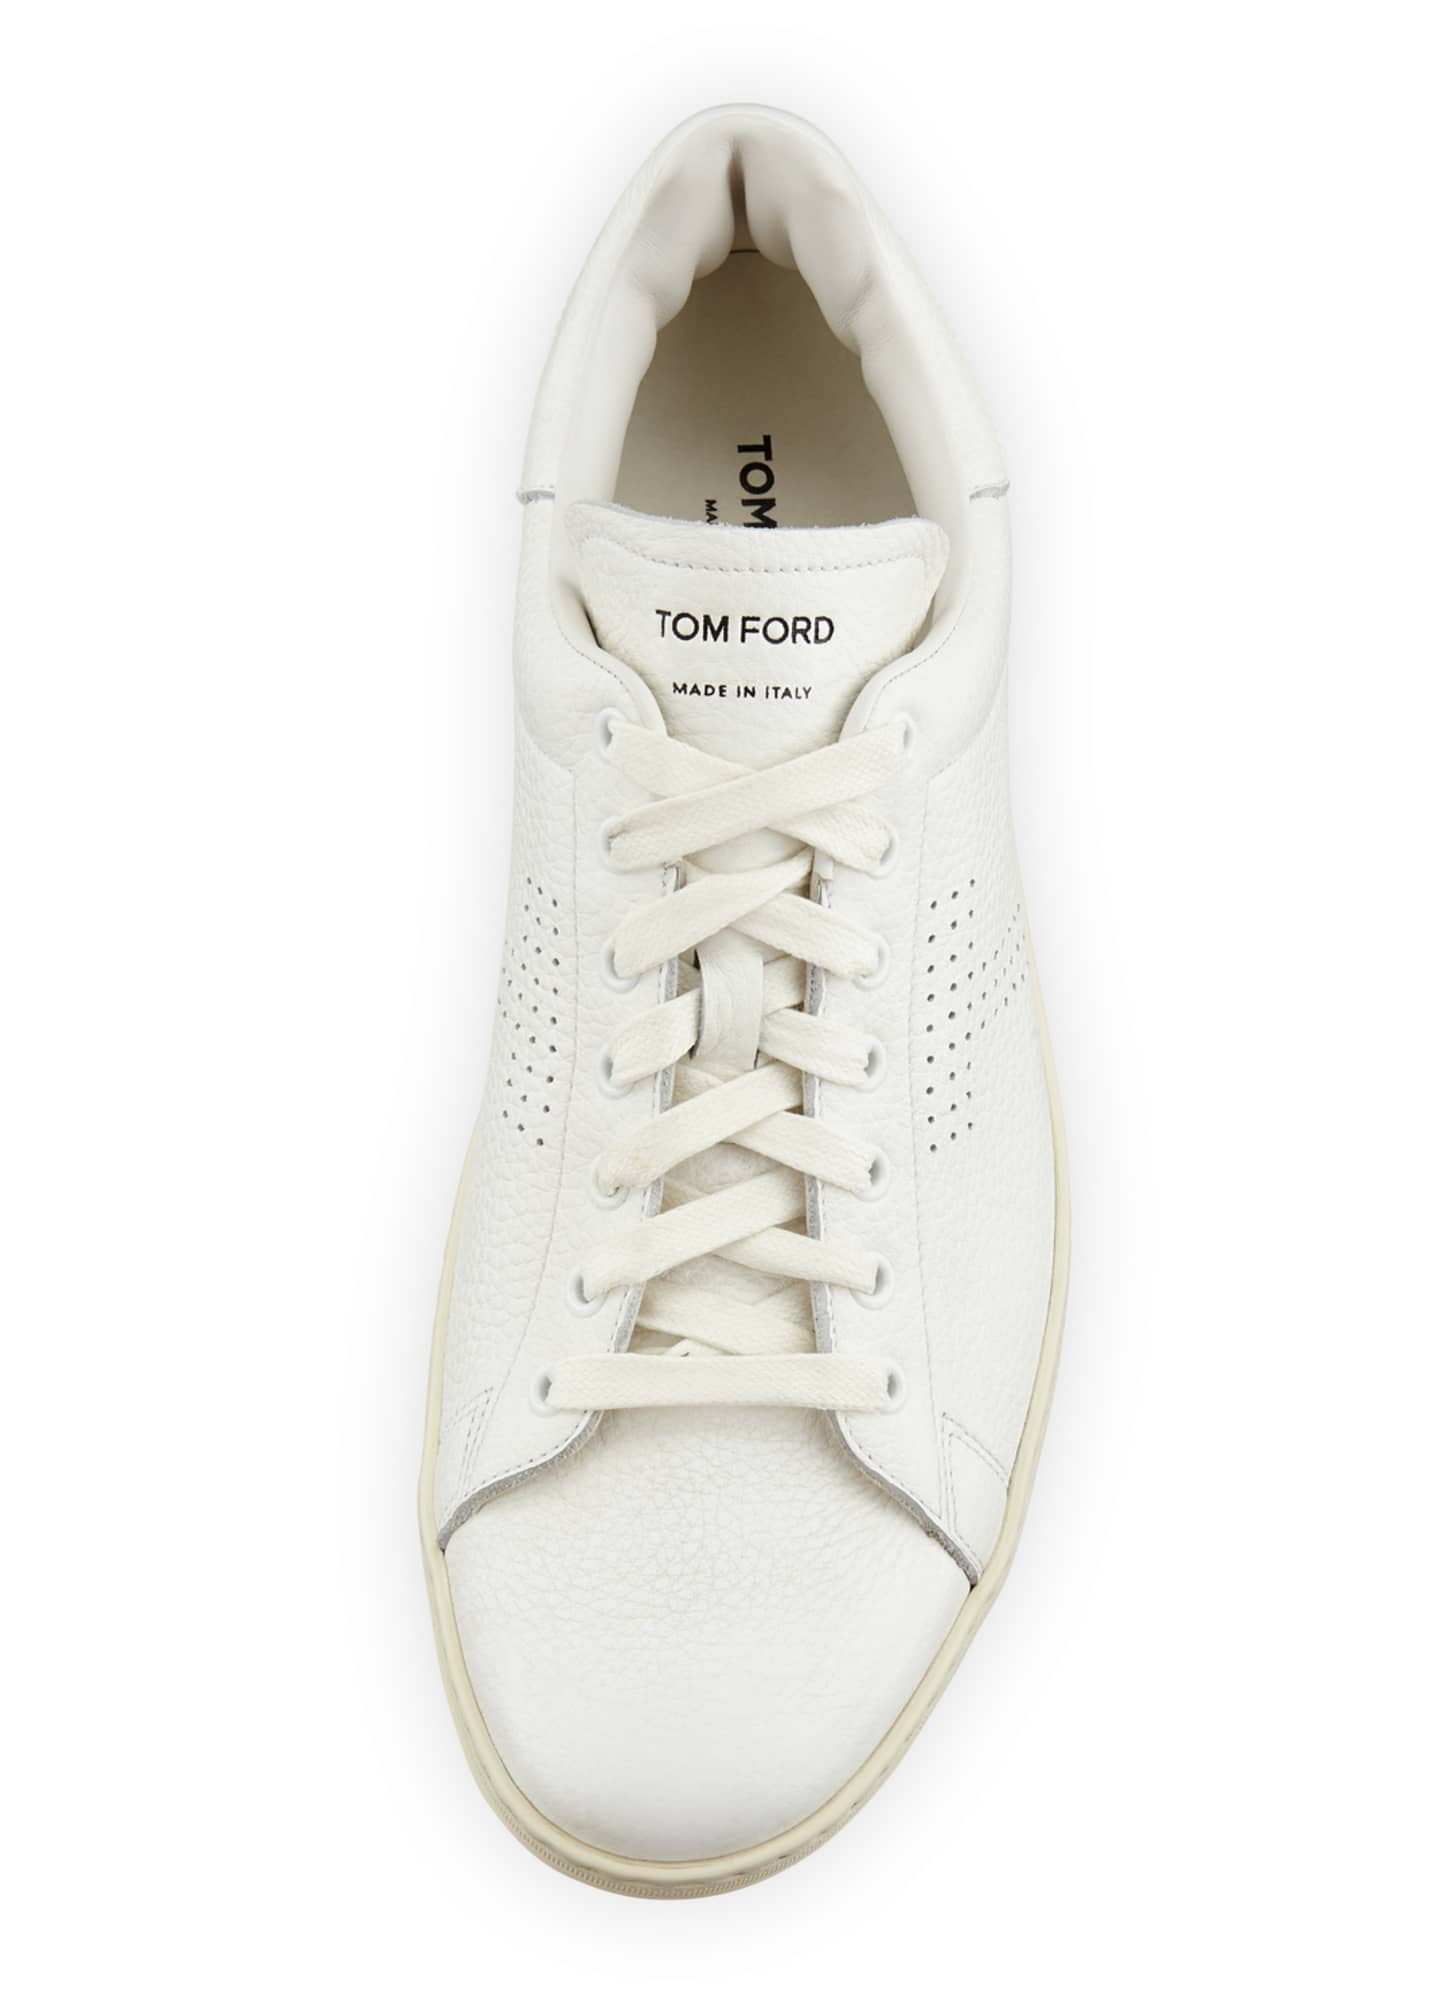 TOM FORD Men's Warwick Grained Leather Low-Top Sneakers, White ...